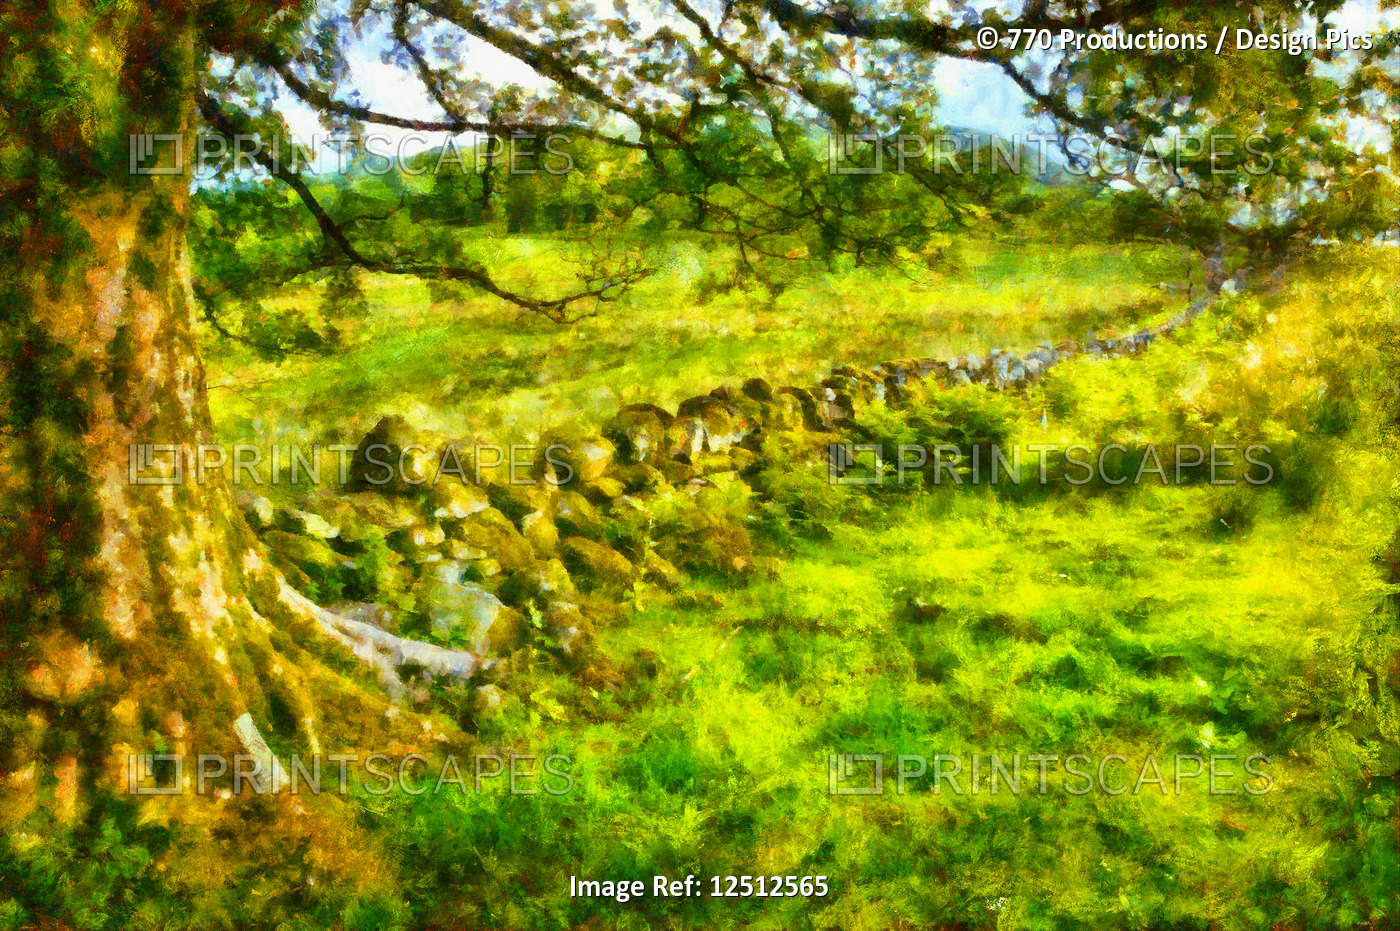 Digital painting of the lush green grass in the old country